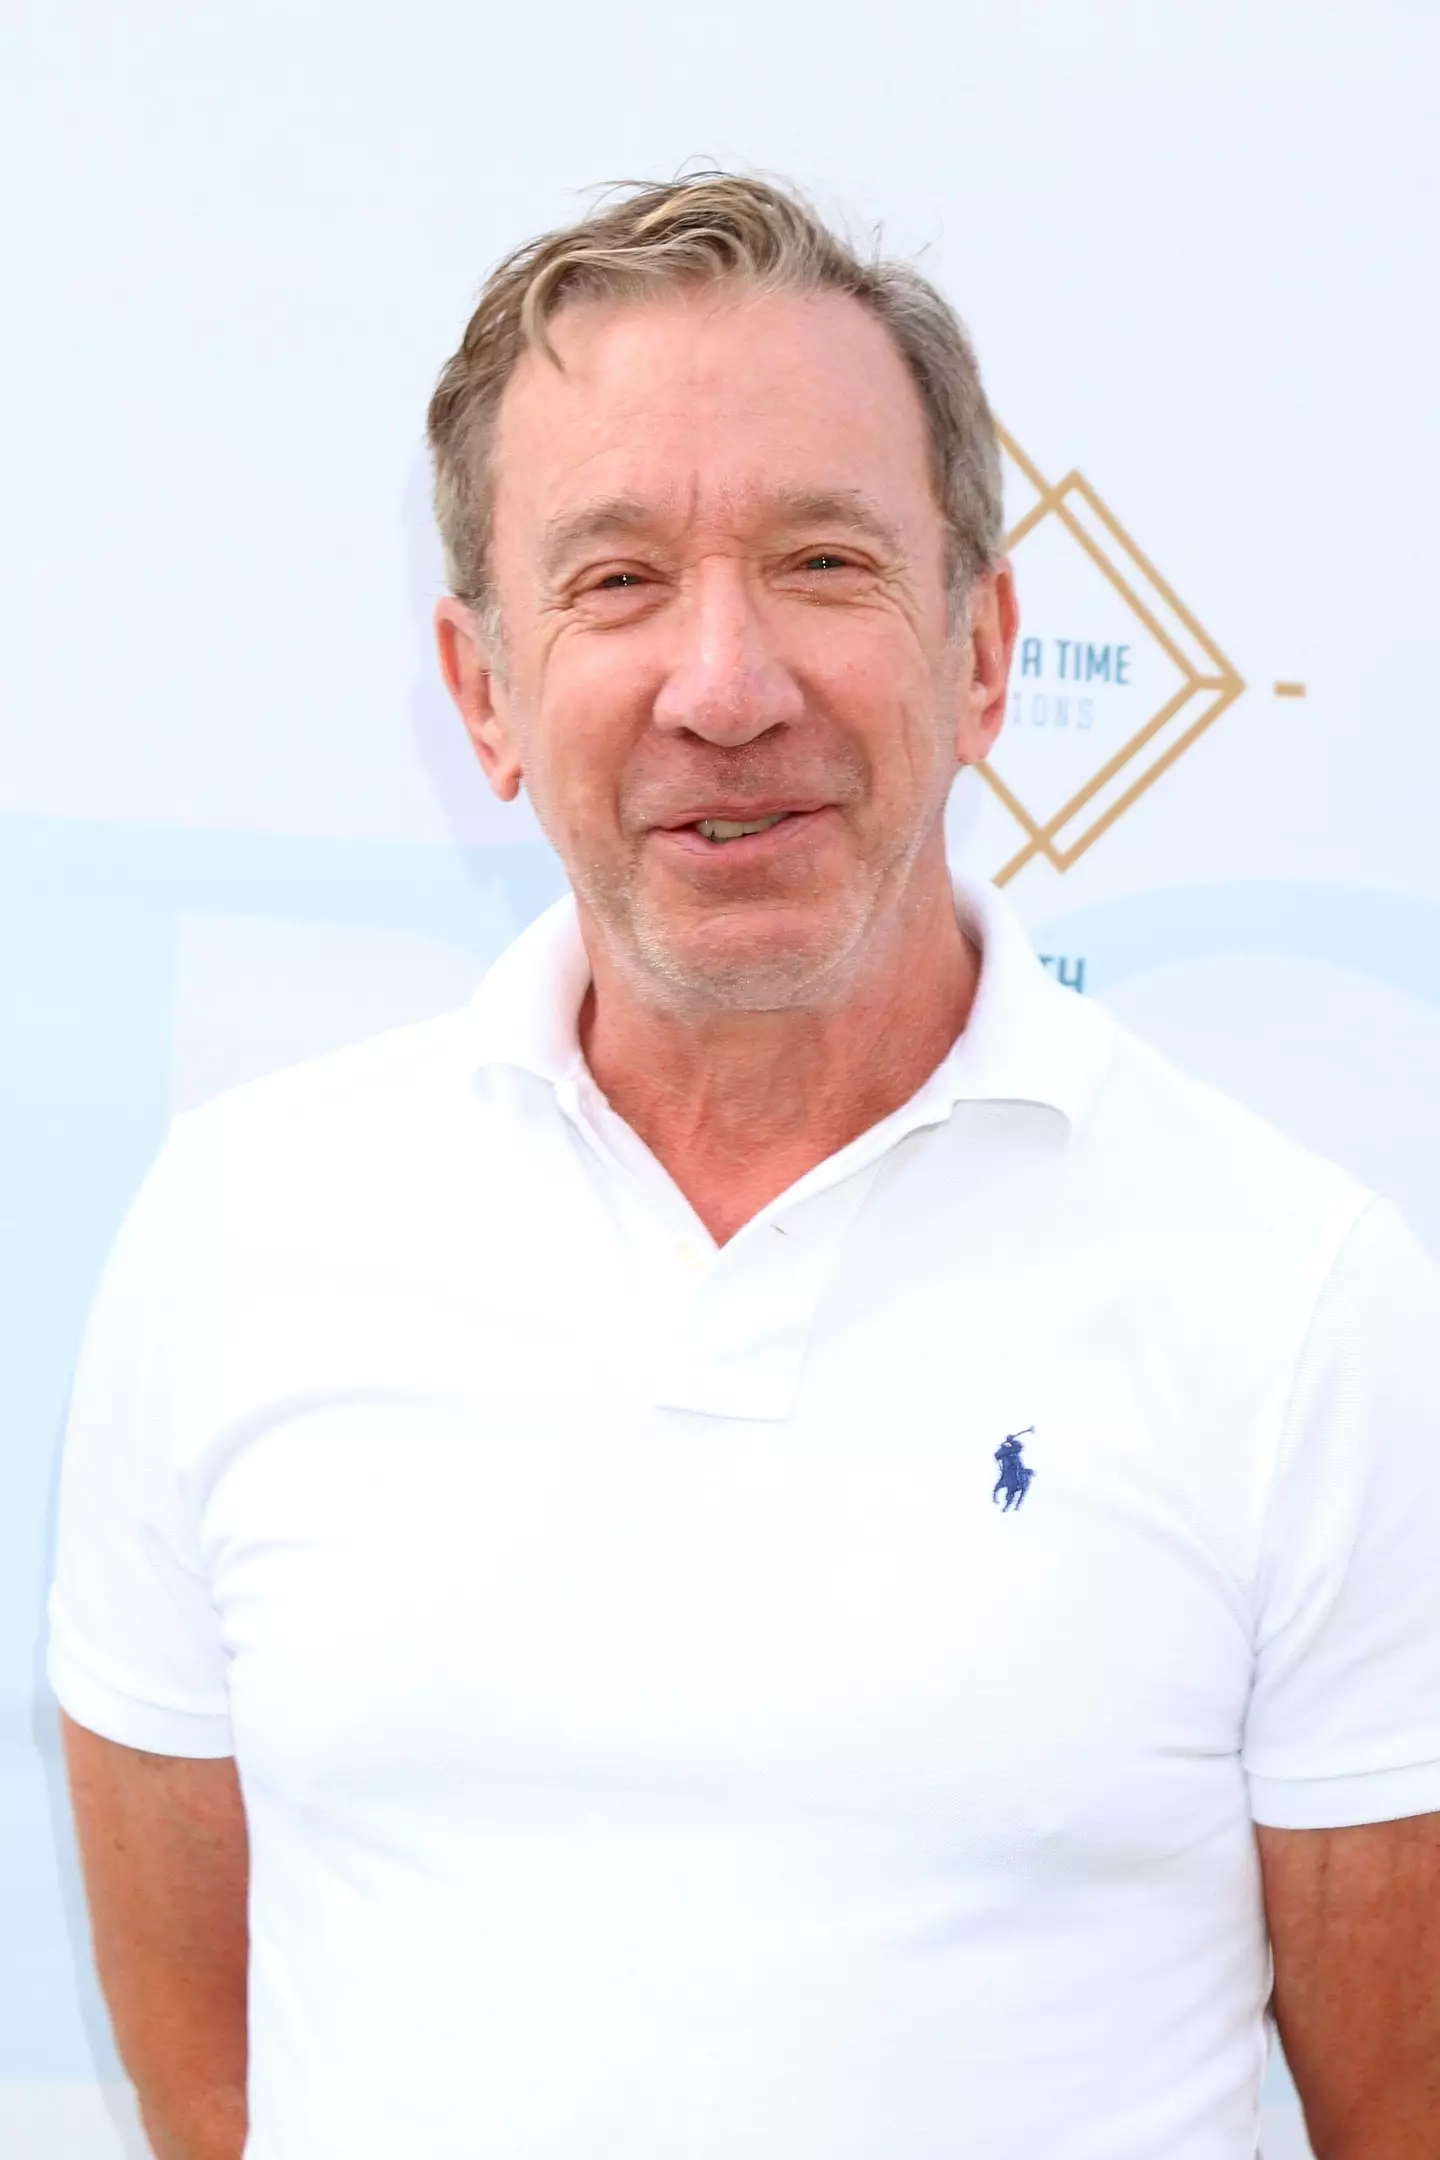 Tim Allen says he doesn't really get the new Buzz Lightyear movie.